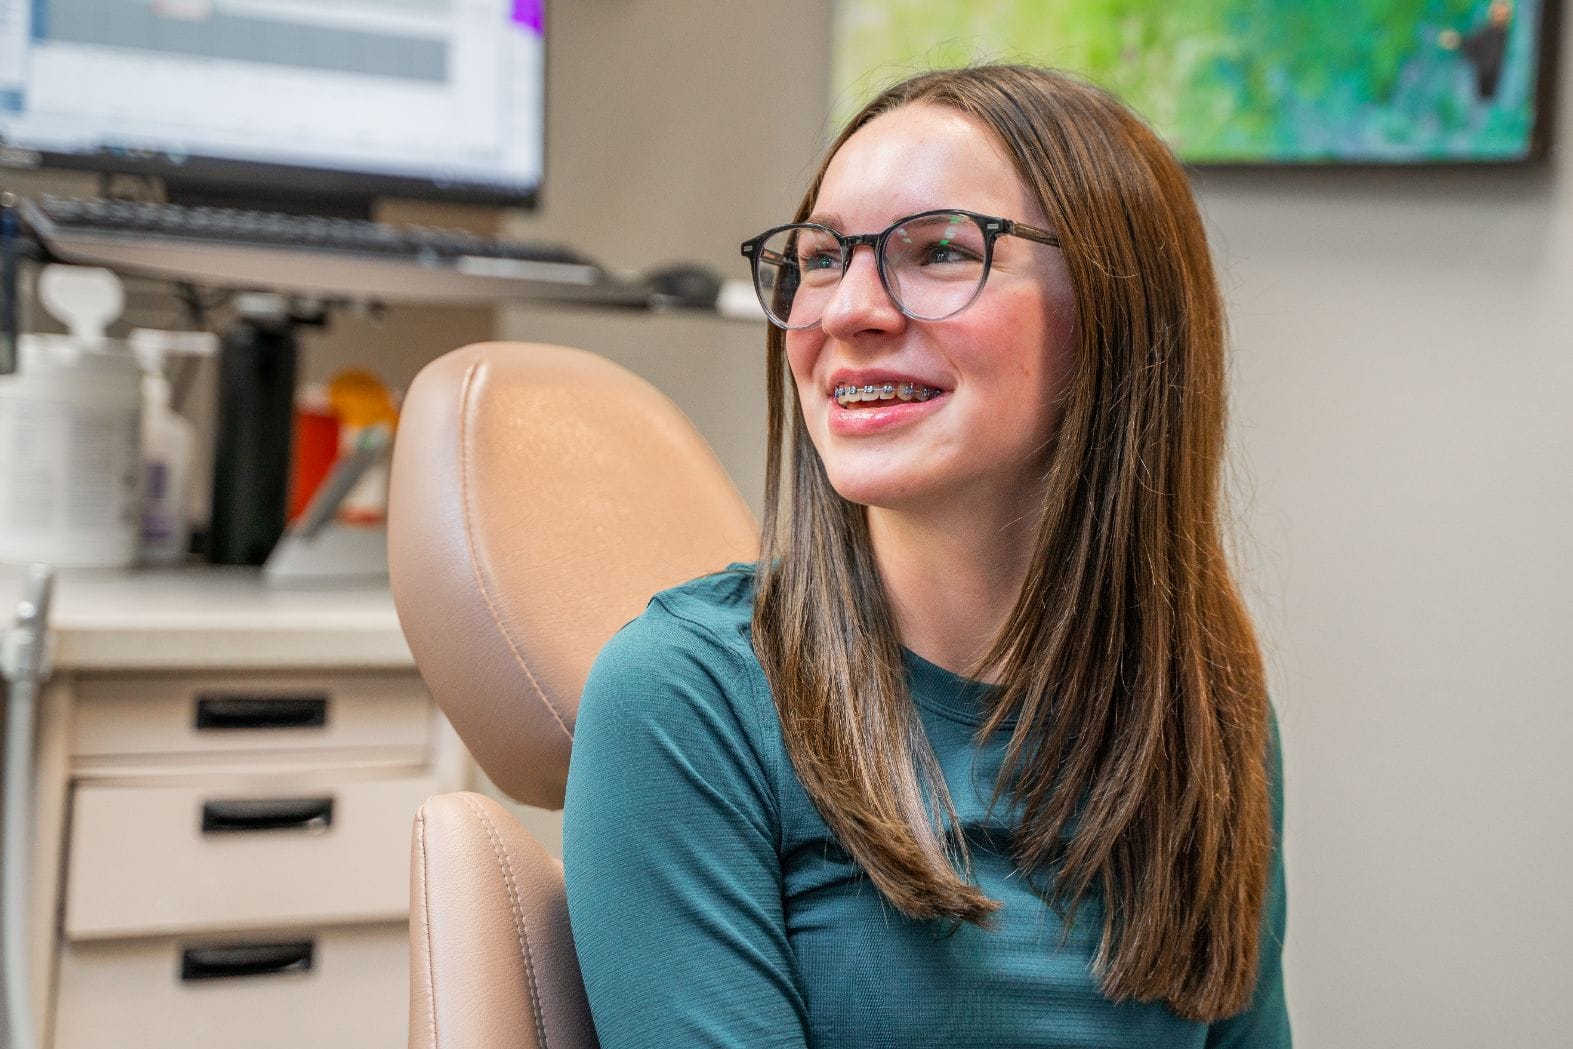 A teen girl smiles while sitting in a dental chair.